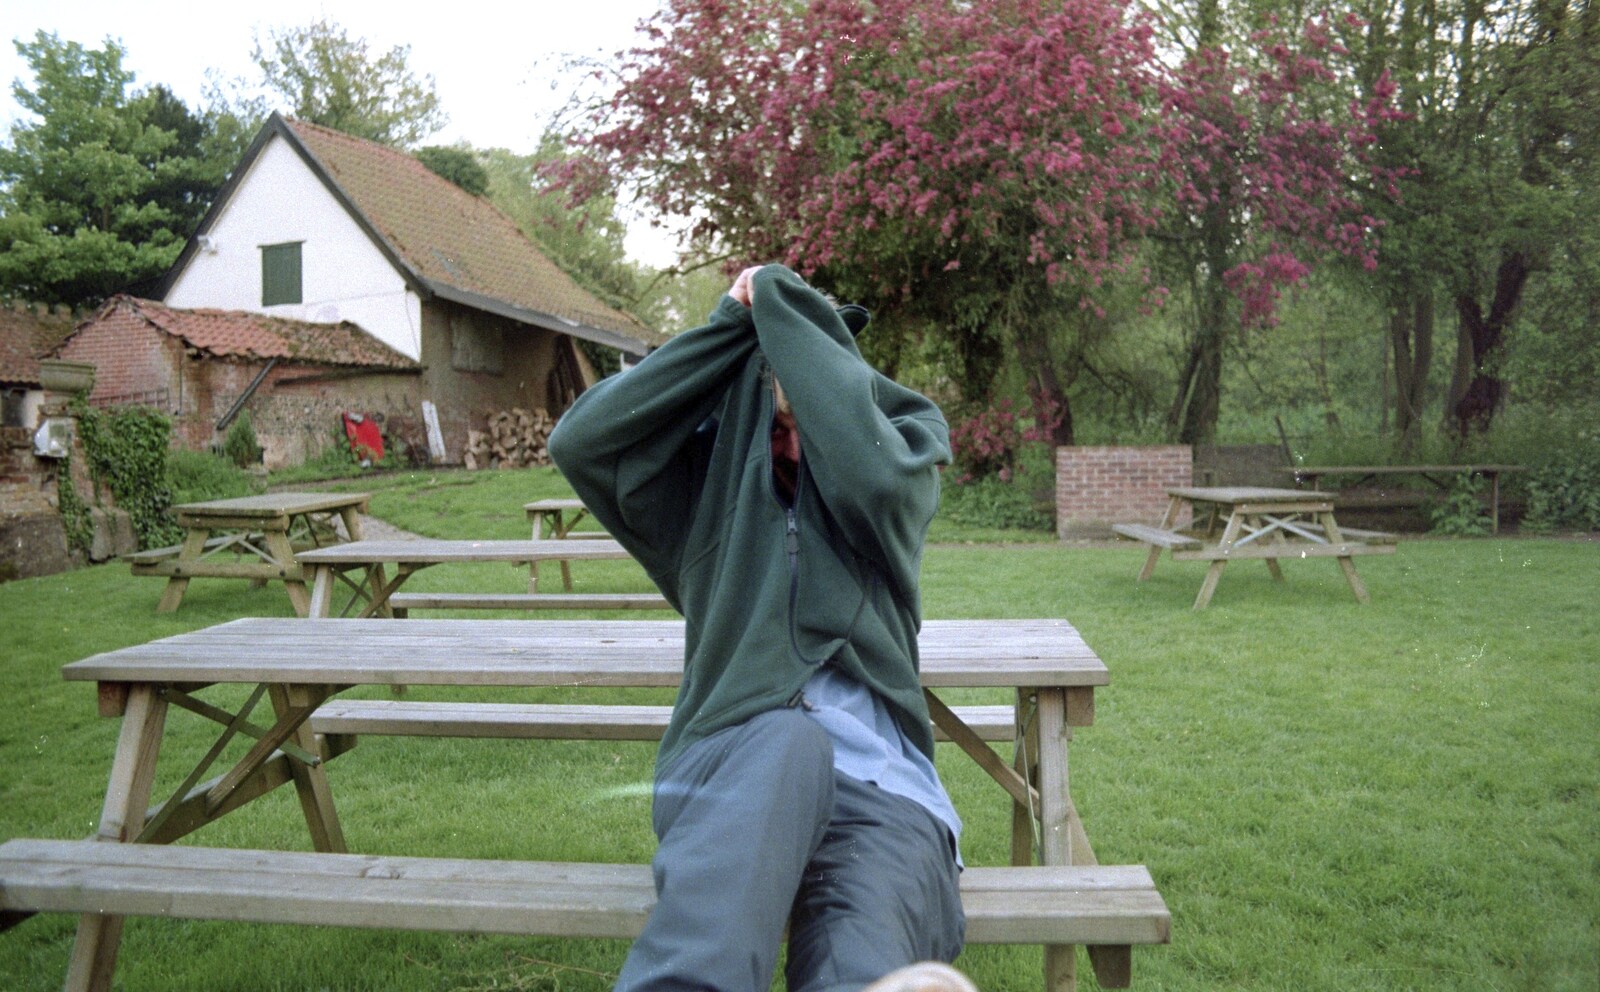 Paul takes his hoodie off from A BSCC Bike Ride, Brockdish Greyhound and Hoxne Swan, Suffolk - 4th May 2000